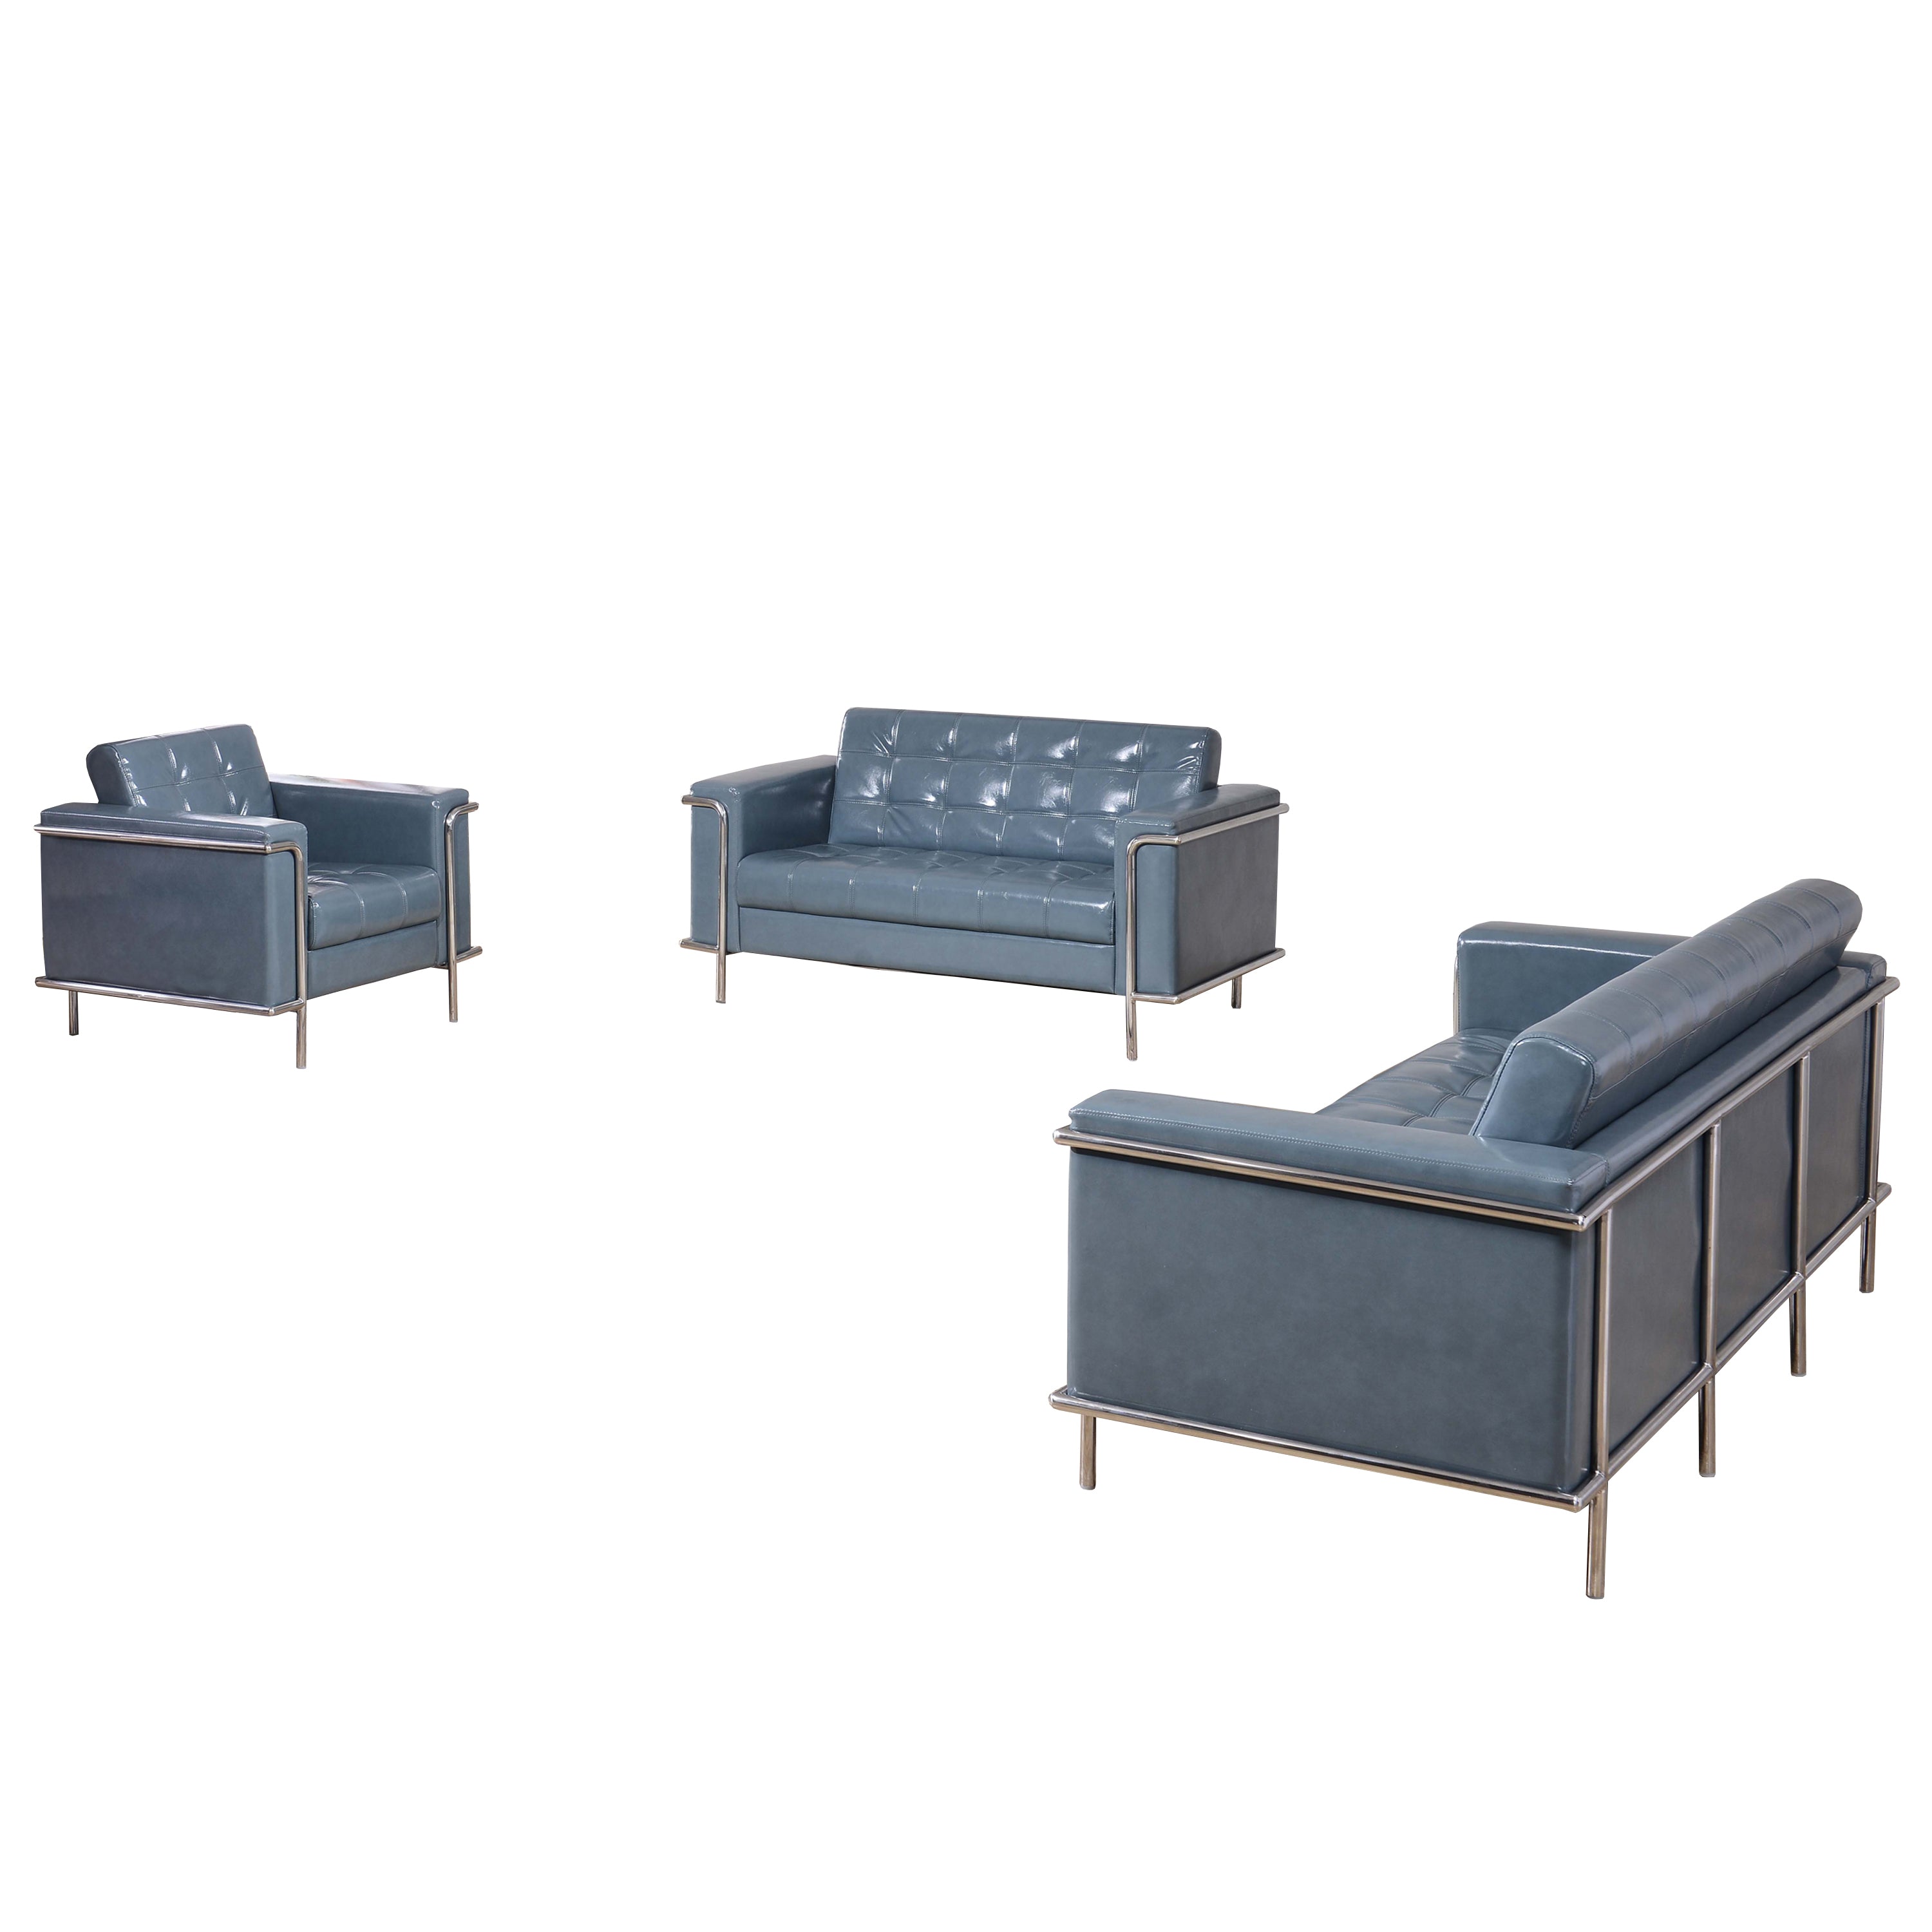 HERCULES LeatherSoft Double Stitch Detail Reception Set with Encasing Frame-Reception Set-Flash Furniture-Wall2Wall Furnishings